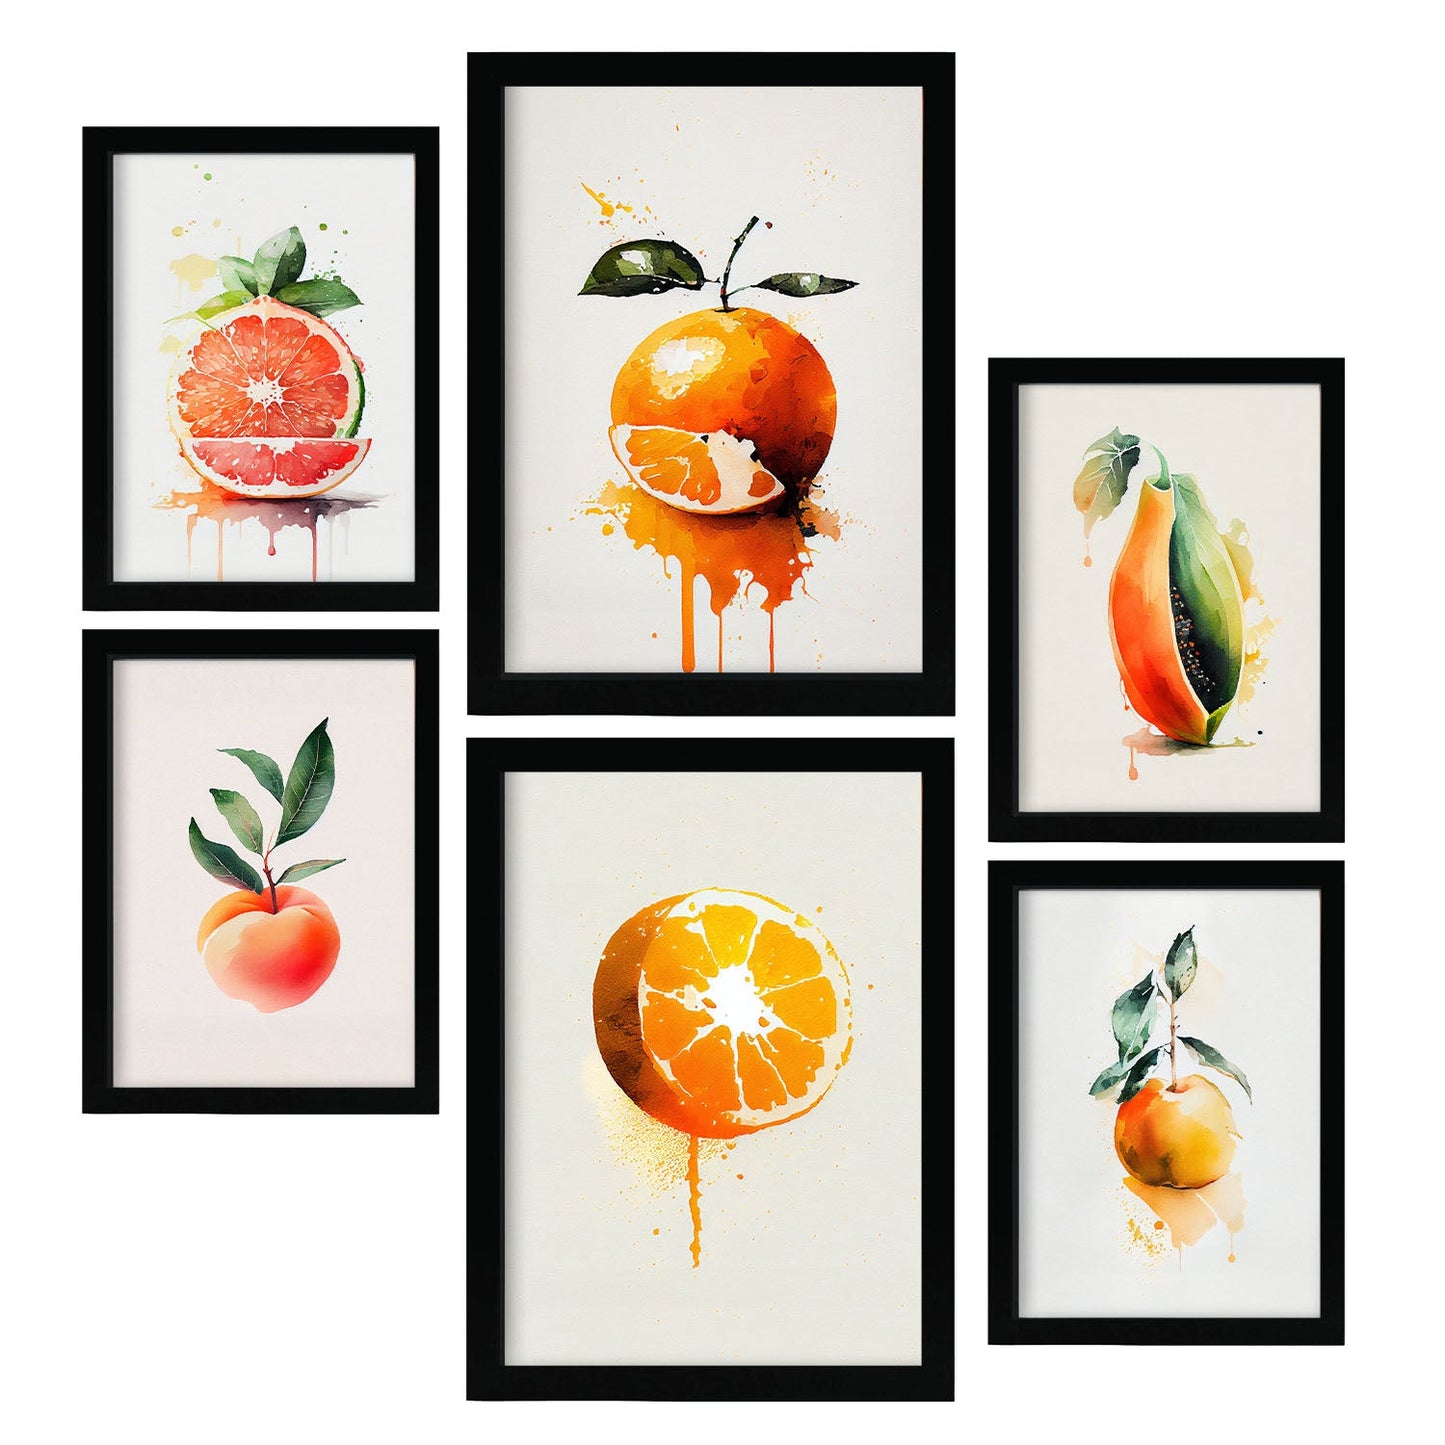 Nacnic Watercolor Fruits Set_10. Aesthetic Wall Art Prints for Bedroom or Living Room Design.